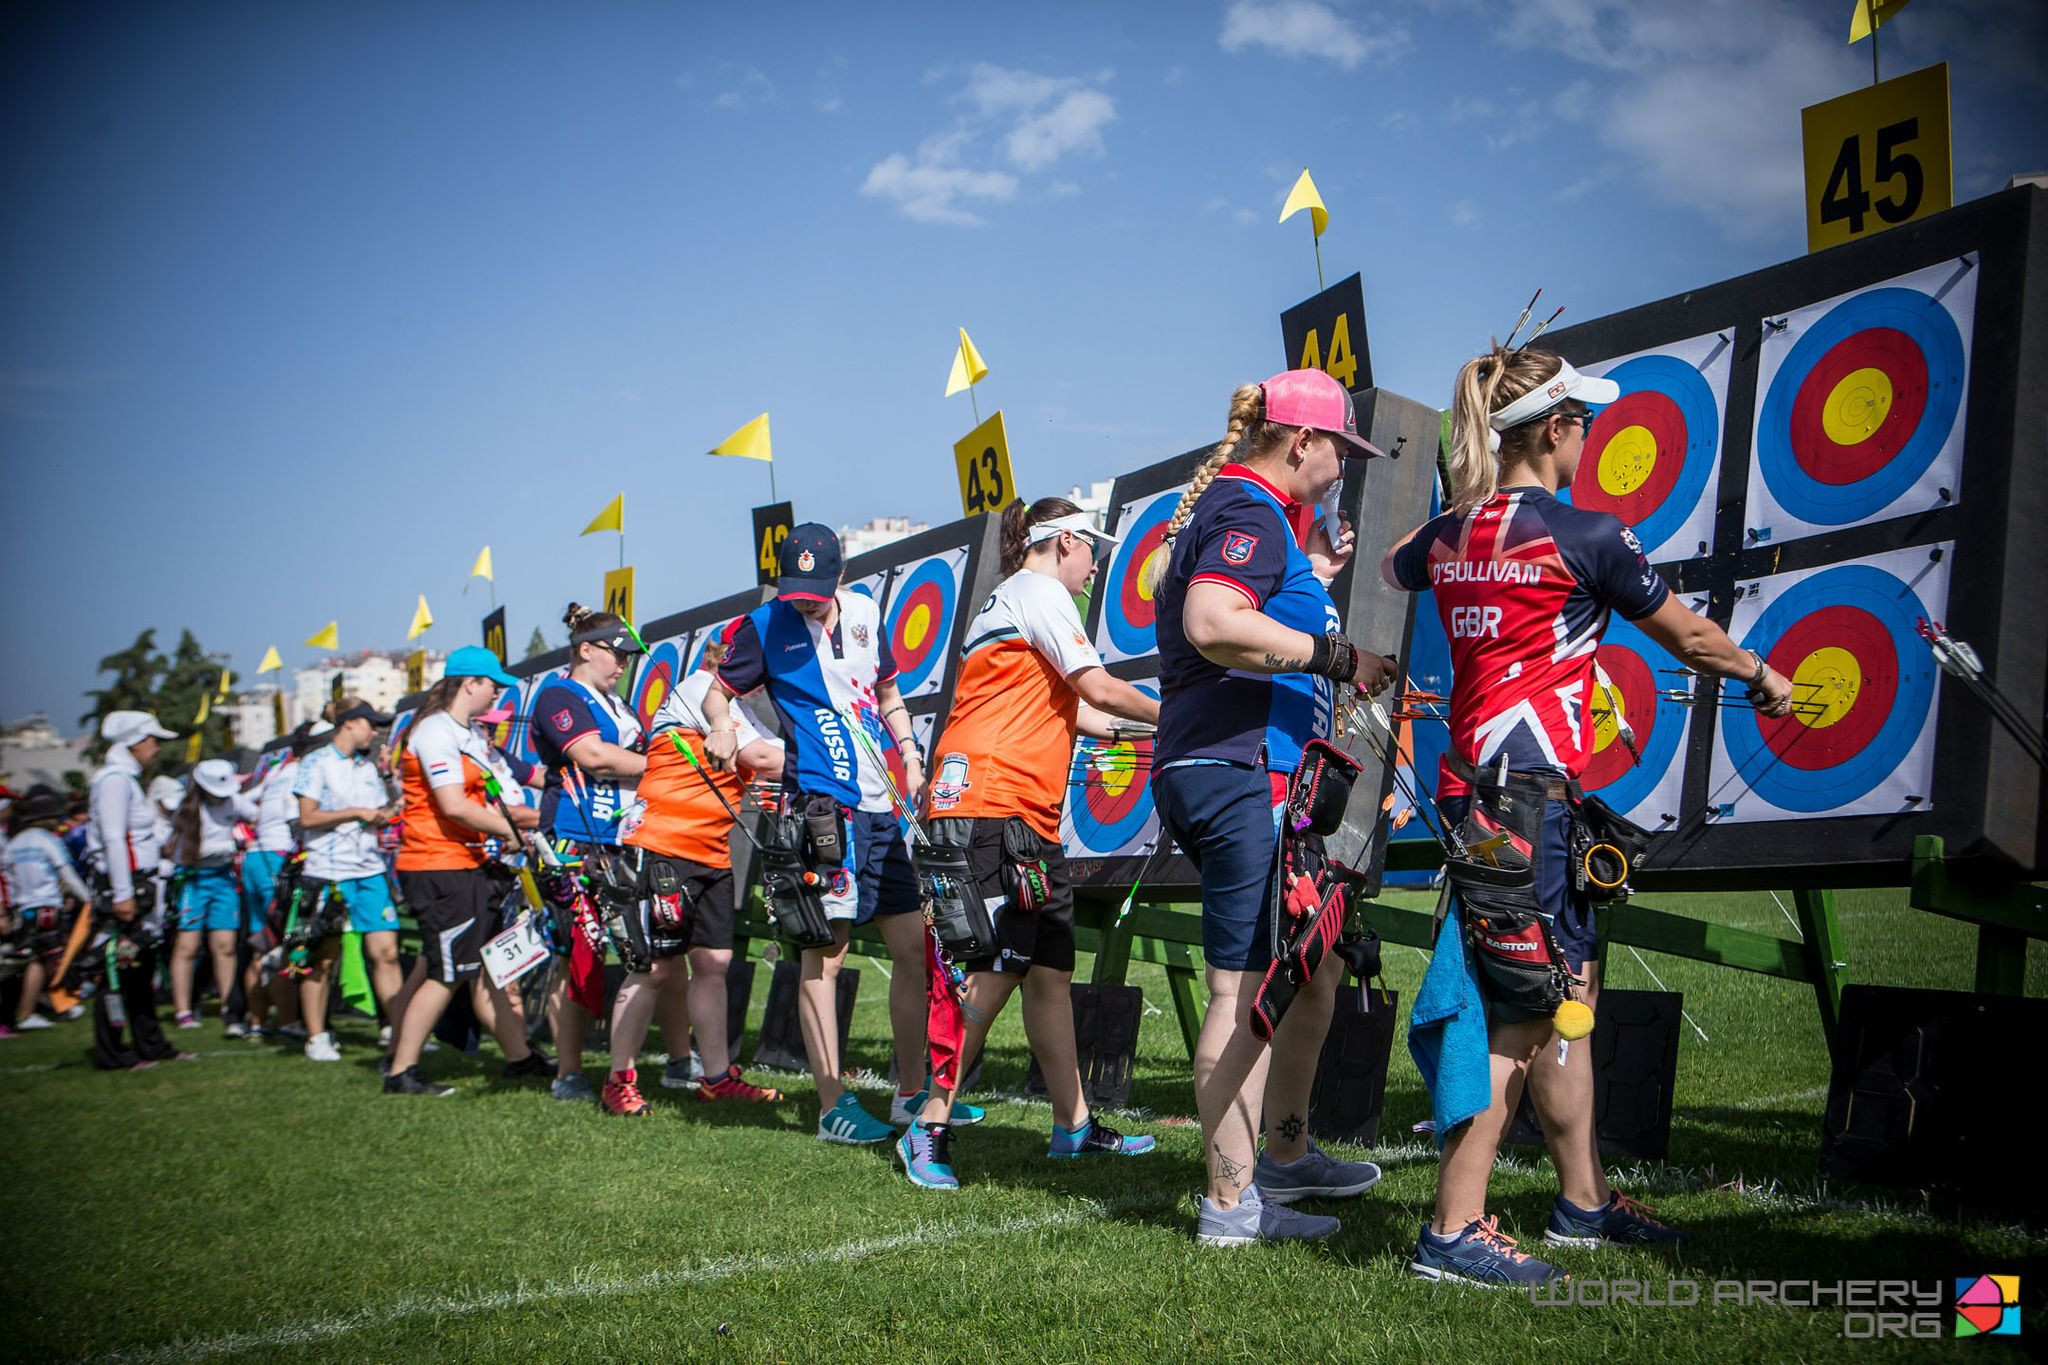 A total of 383 athletes from 54 countries will take part in the third leg of the Archery World Cup that starts in Antalya, Turkey tomorrow ©World Archery